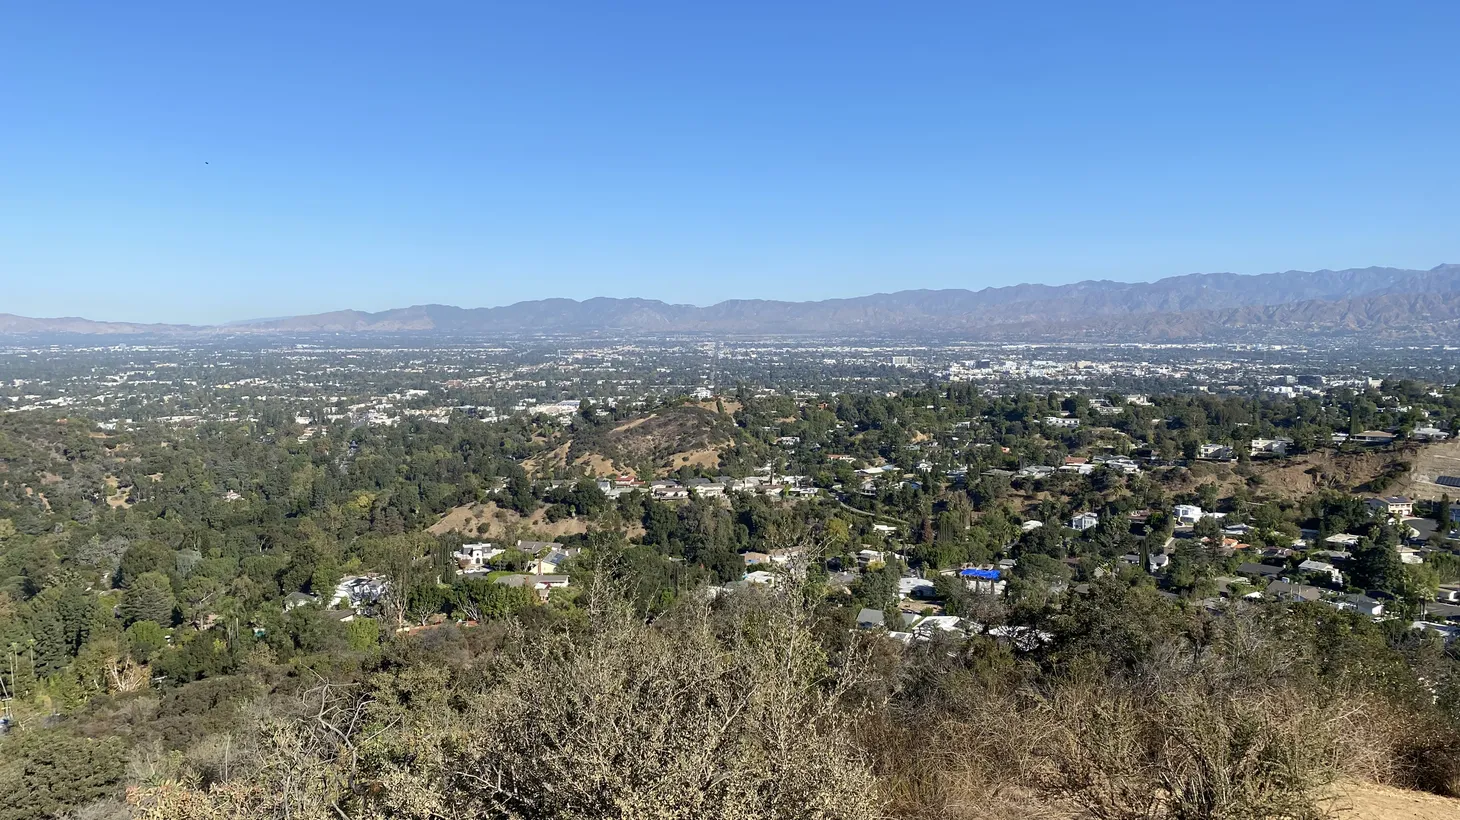 The San Fernando Valley sprawls north of Mulholland Drive. Thanks to redistricting, for the first time this year, there will be an LA County supervisor who represents most of the Valley.